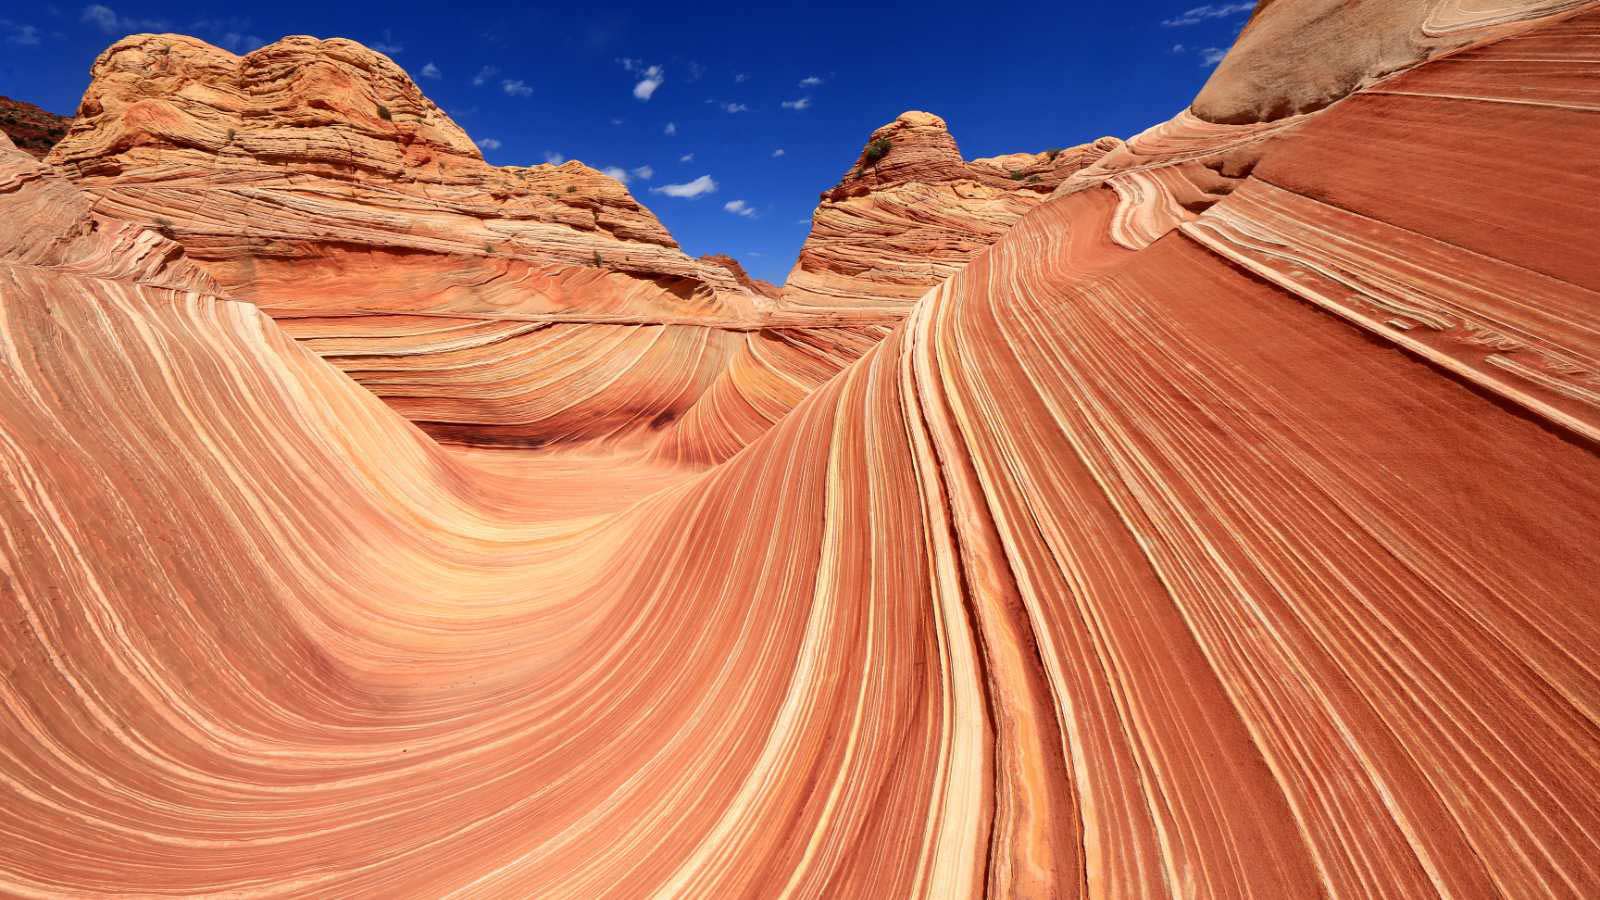 <p>The Wave is a rock formation (sandstone) located in Arizona, near its border with Utah. The Wave is so well known amongst hikers and photographers that they have to limit the number of people that go there. They have a daily lottery system used to dispense only ten next-day permits in person and ten online permits, so basically 20 people a day get to go and check this out with a guide.</p>